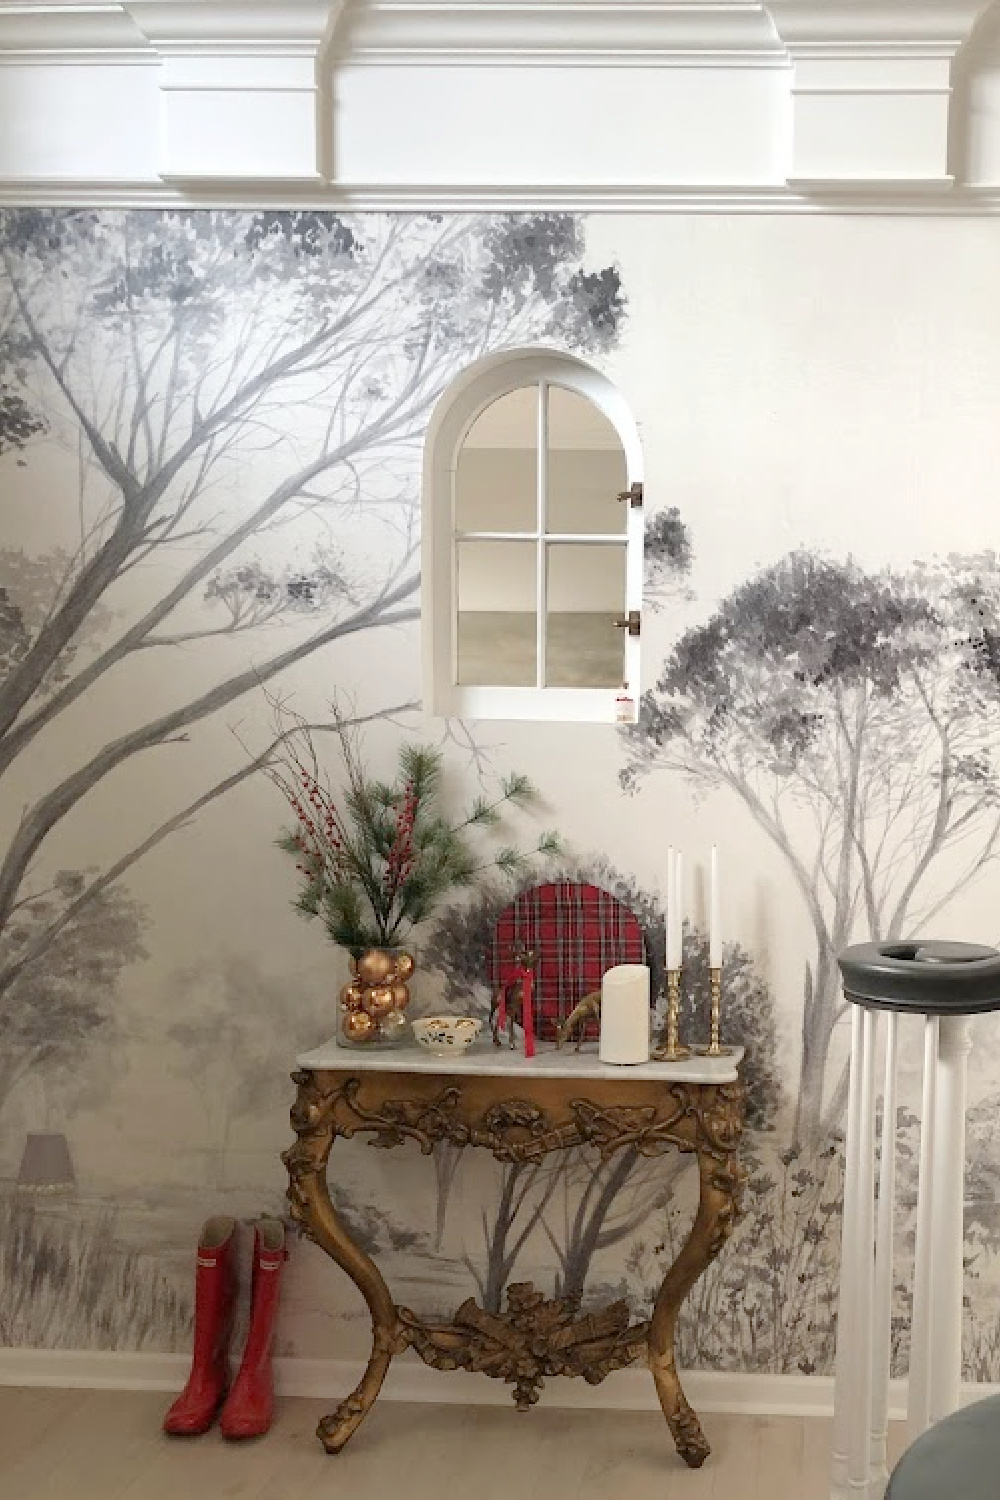 French antique console table decorated for Christmas in entry with grisaille tree wallpaper mural - Hello Lovely Studio. #modernfrench #frenchchristmas